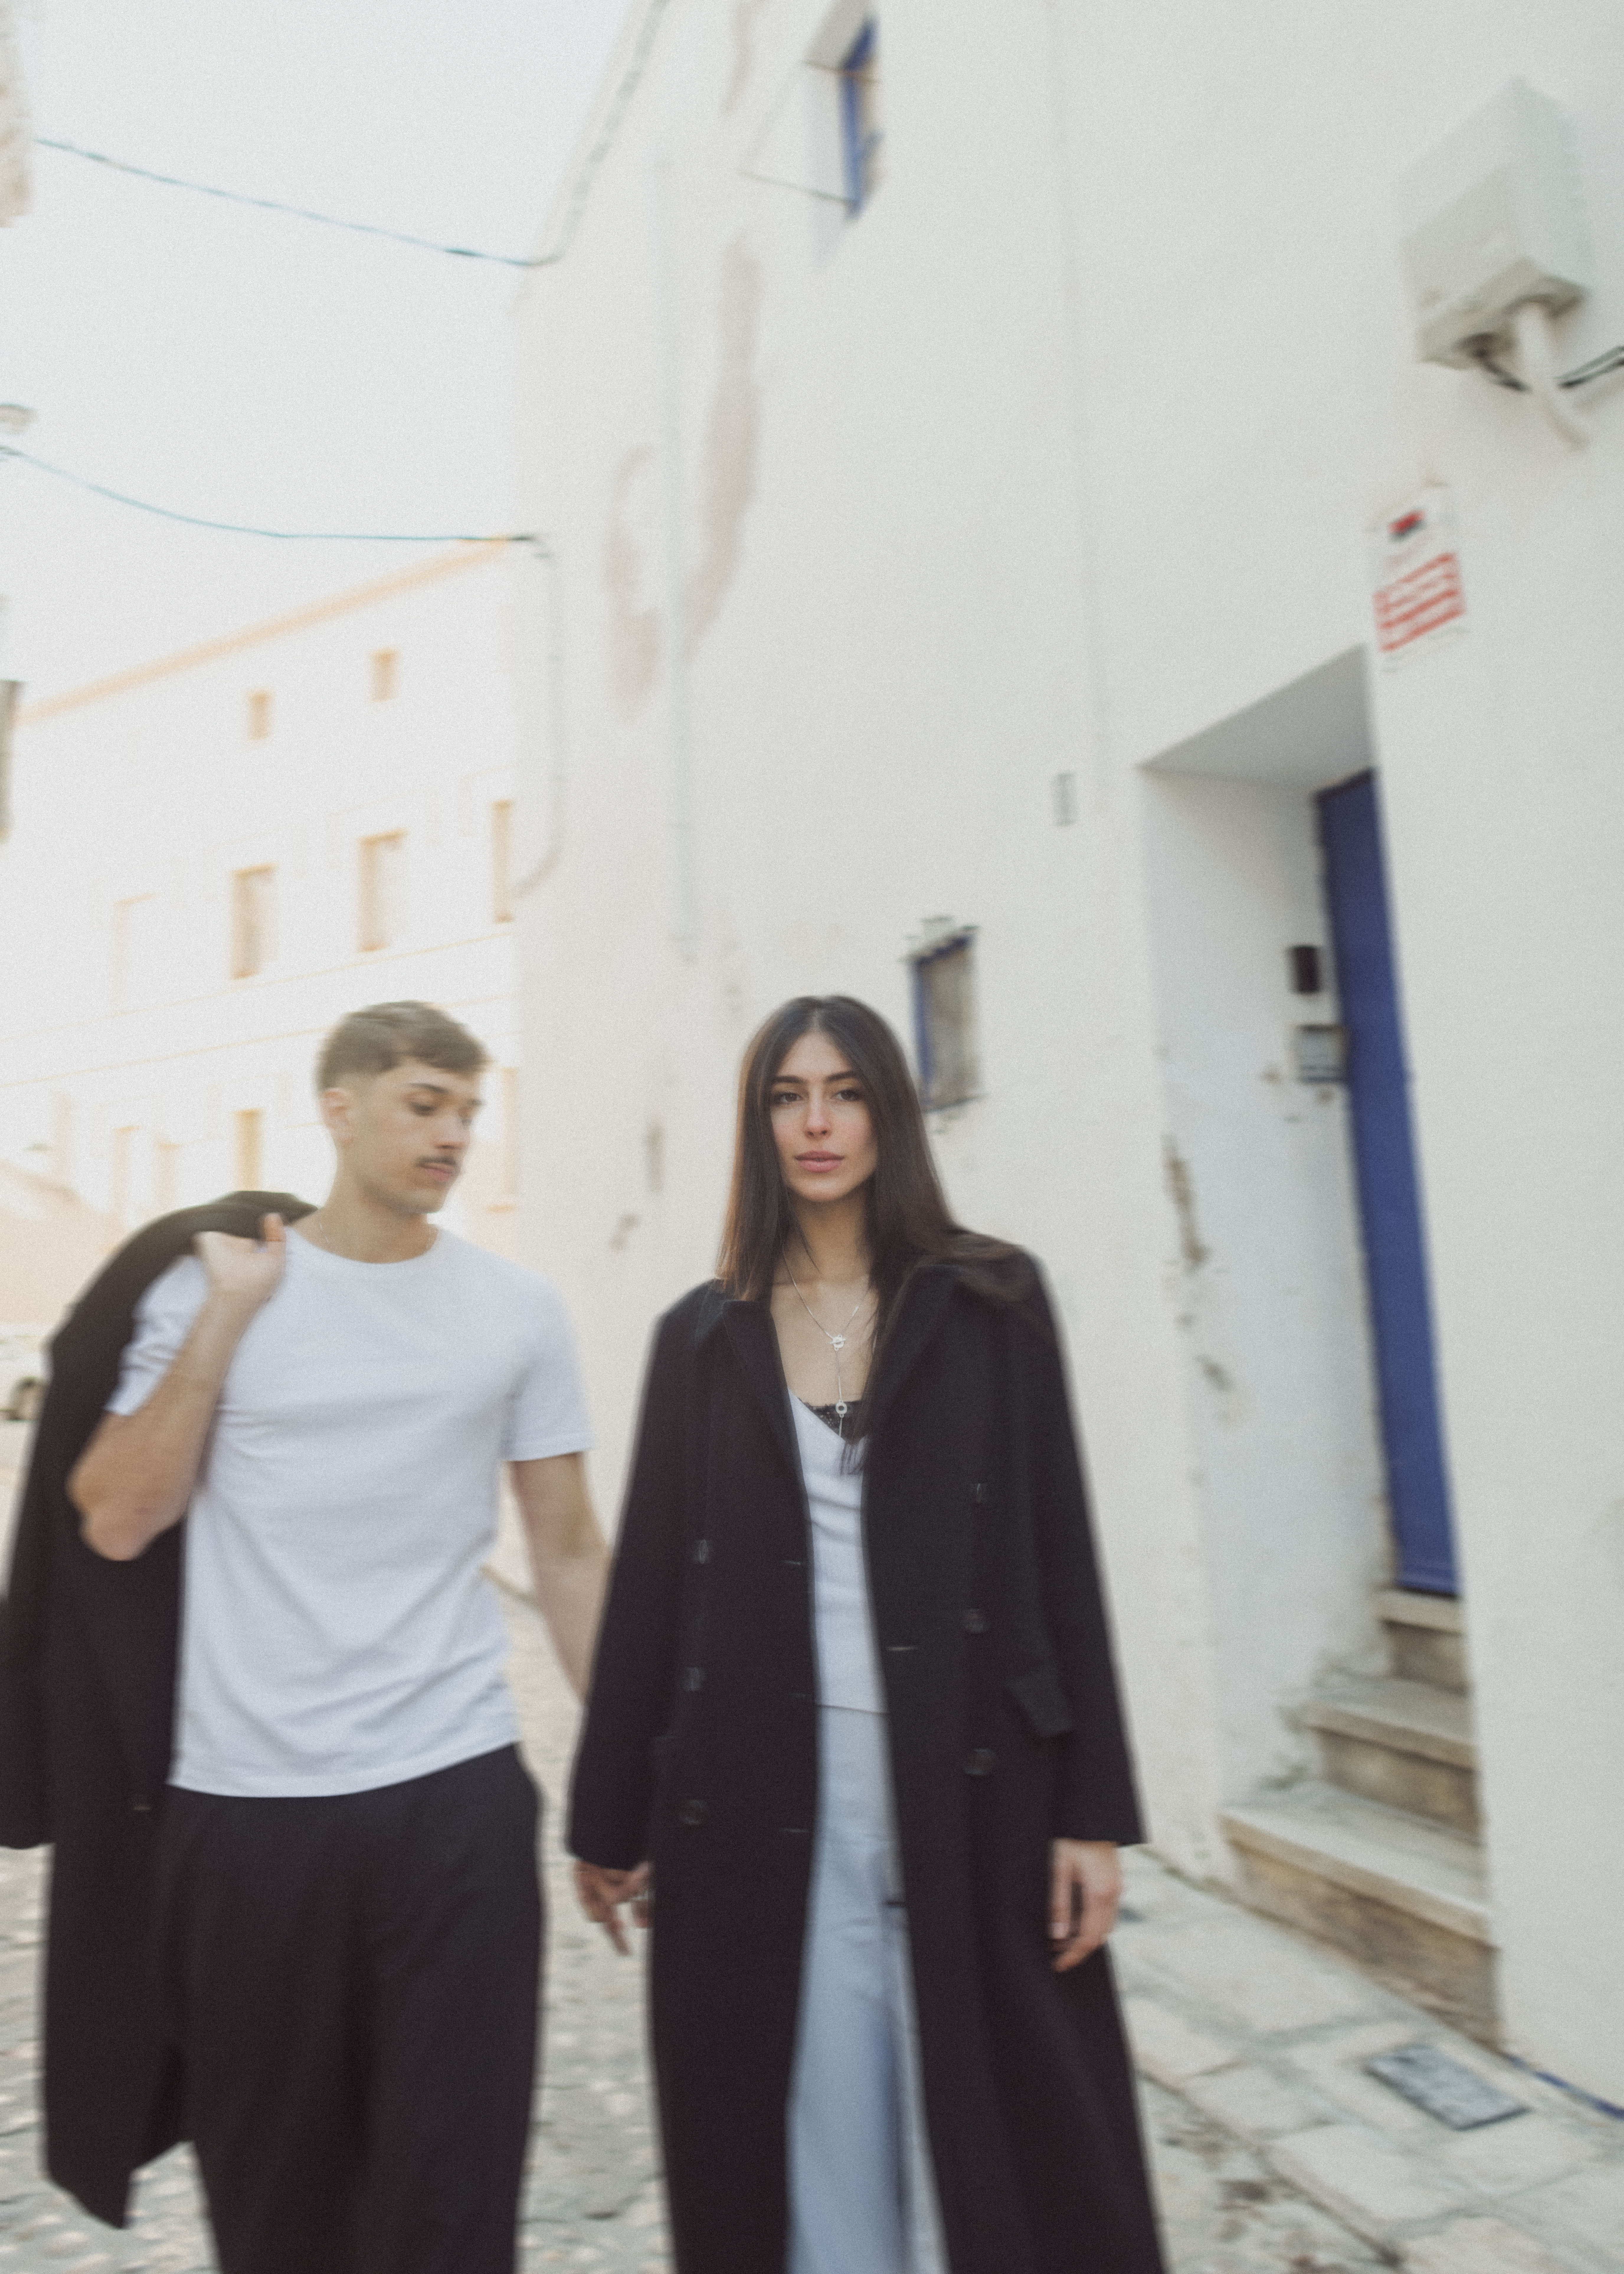 Editorial Couple Portraits: Capturing Sitges' Urban Vibe